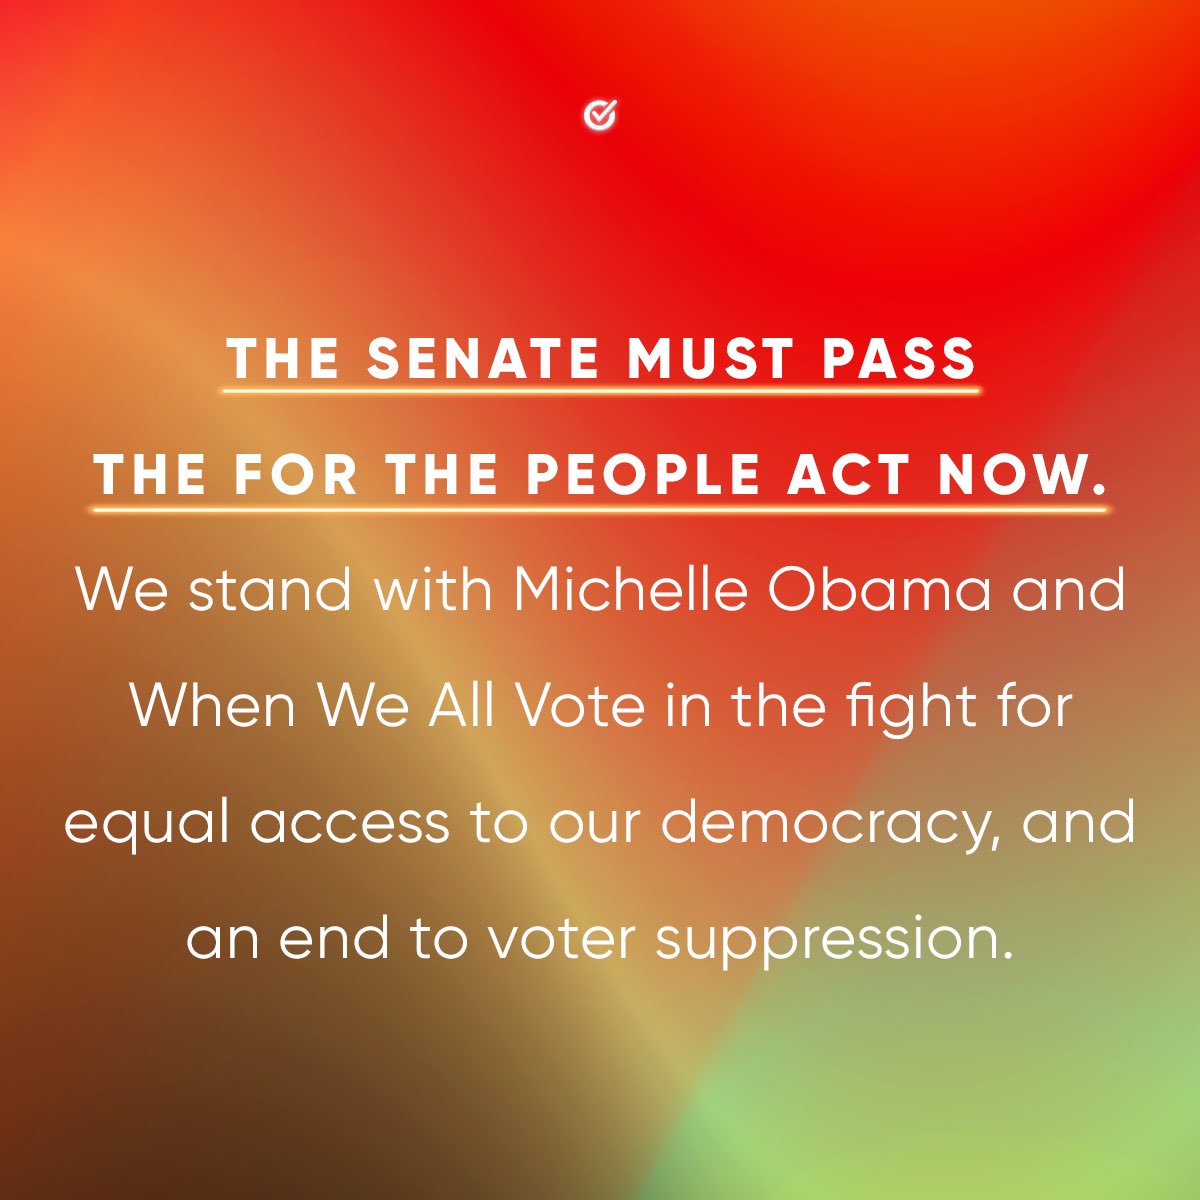 Now is our chance to protect and strengthen our democracy and put power back where it belongs—with the people.

I'm proud to stand with @MichelleObama and @WhenWeAllVote to urge the Senate to pass the #ForThePeopleAct. Read our letter & take action: weall.vote/democracy